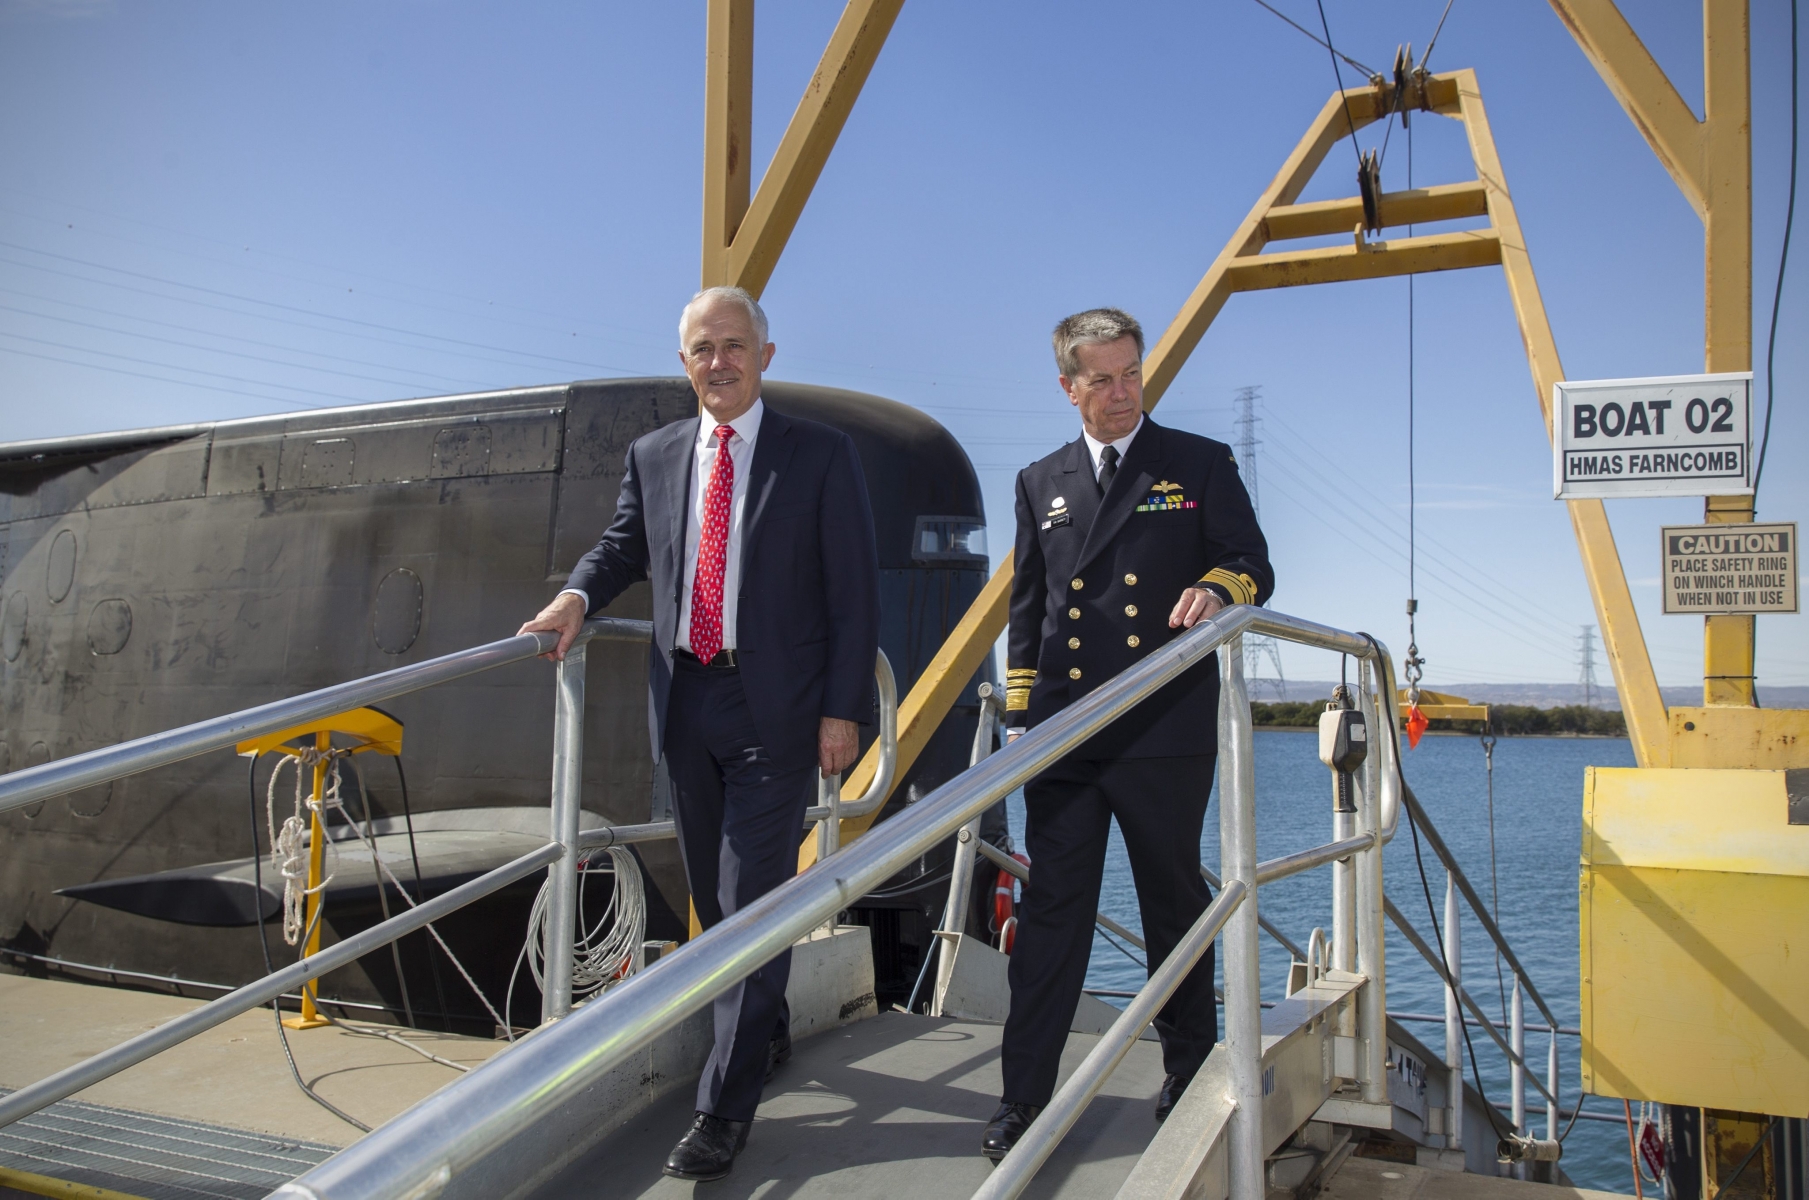 epa05277560 Australian Prime Minister Malcolm Turnbull (L) and Vice Admiral Timothy Barrett AO, CSC, RAN senior officer in the Royal Australian Navy (RAN) disembark from the deck of a submarine in Adelaide, Australia, 26 April 2016. Turnbull has named France as the winner of the 50 billion Australian dollar (about 38.6 billion US dollar) contract to build a fleet of submarines for the Royal Australian Navy (RAN). The submarines will be built in Adelaide, Turnbull said. Shipbuilders from France, Germany and Japan took part in the bid.  EPA/BEN MACMAHON AUSTRALIA AND NEW ZEALAND OUT AUSTRALIA DEFENSE SUBMARINE ANNOUNCEMENT